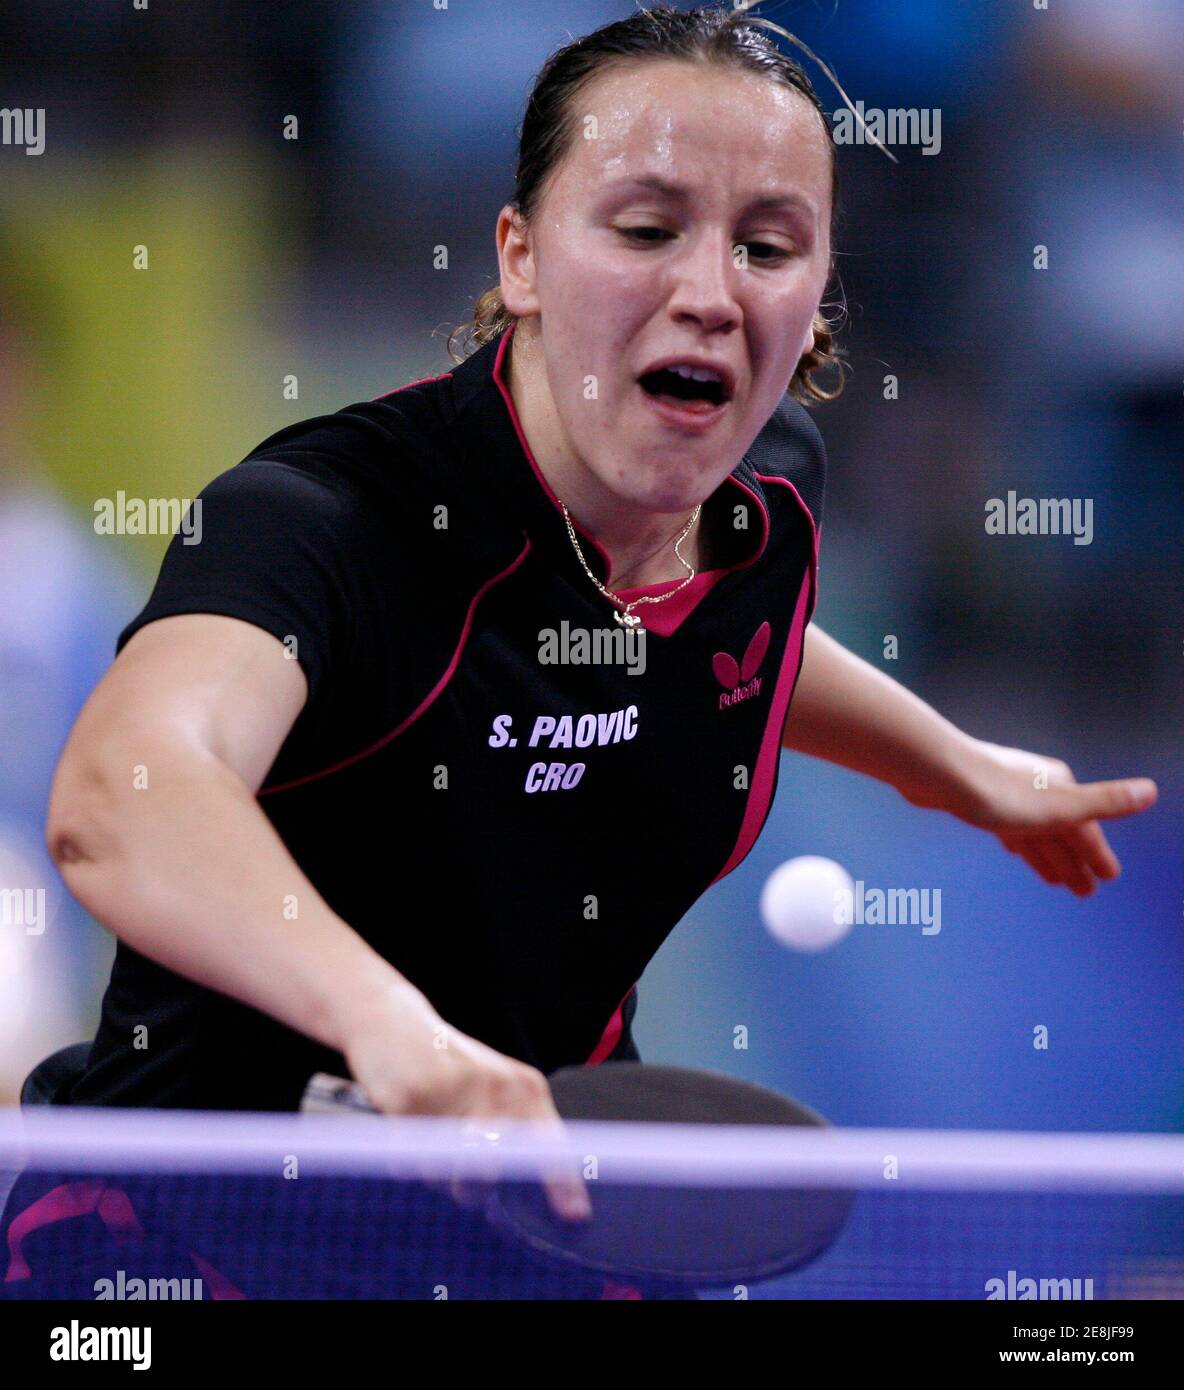 Sandra Paovic of Croatia returns the ball to Jian Fang Lay of Australia during her women's singles first round table tennis match at the Beijing 2008 Olympic Games August 19, 2008.     REUTERS/Beawiharta (CHINA) Stock Photo